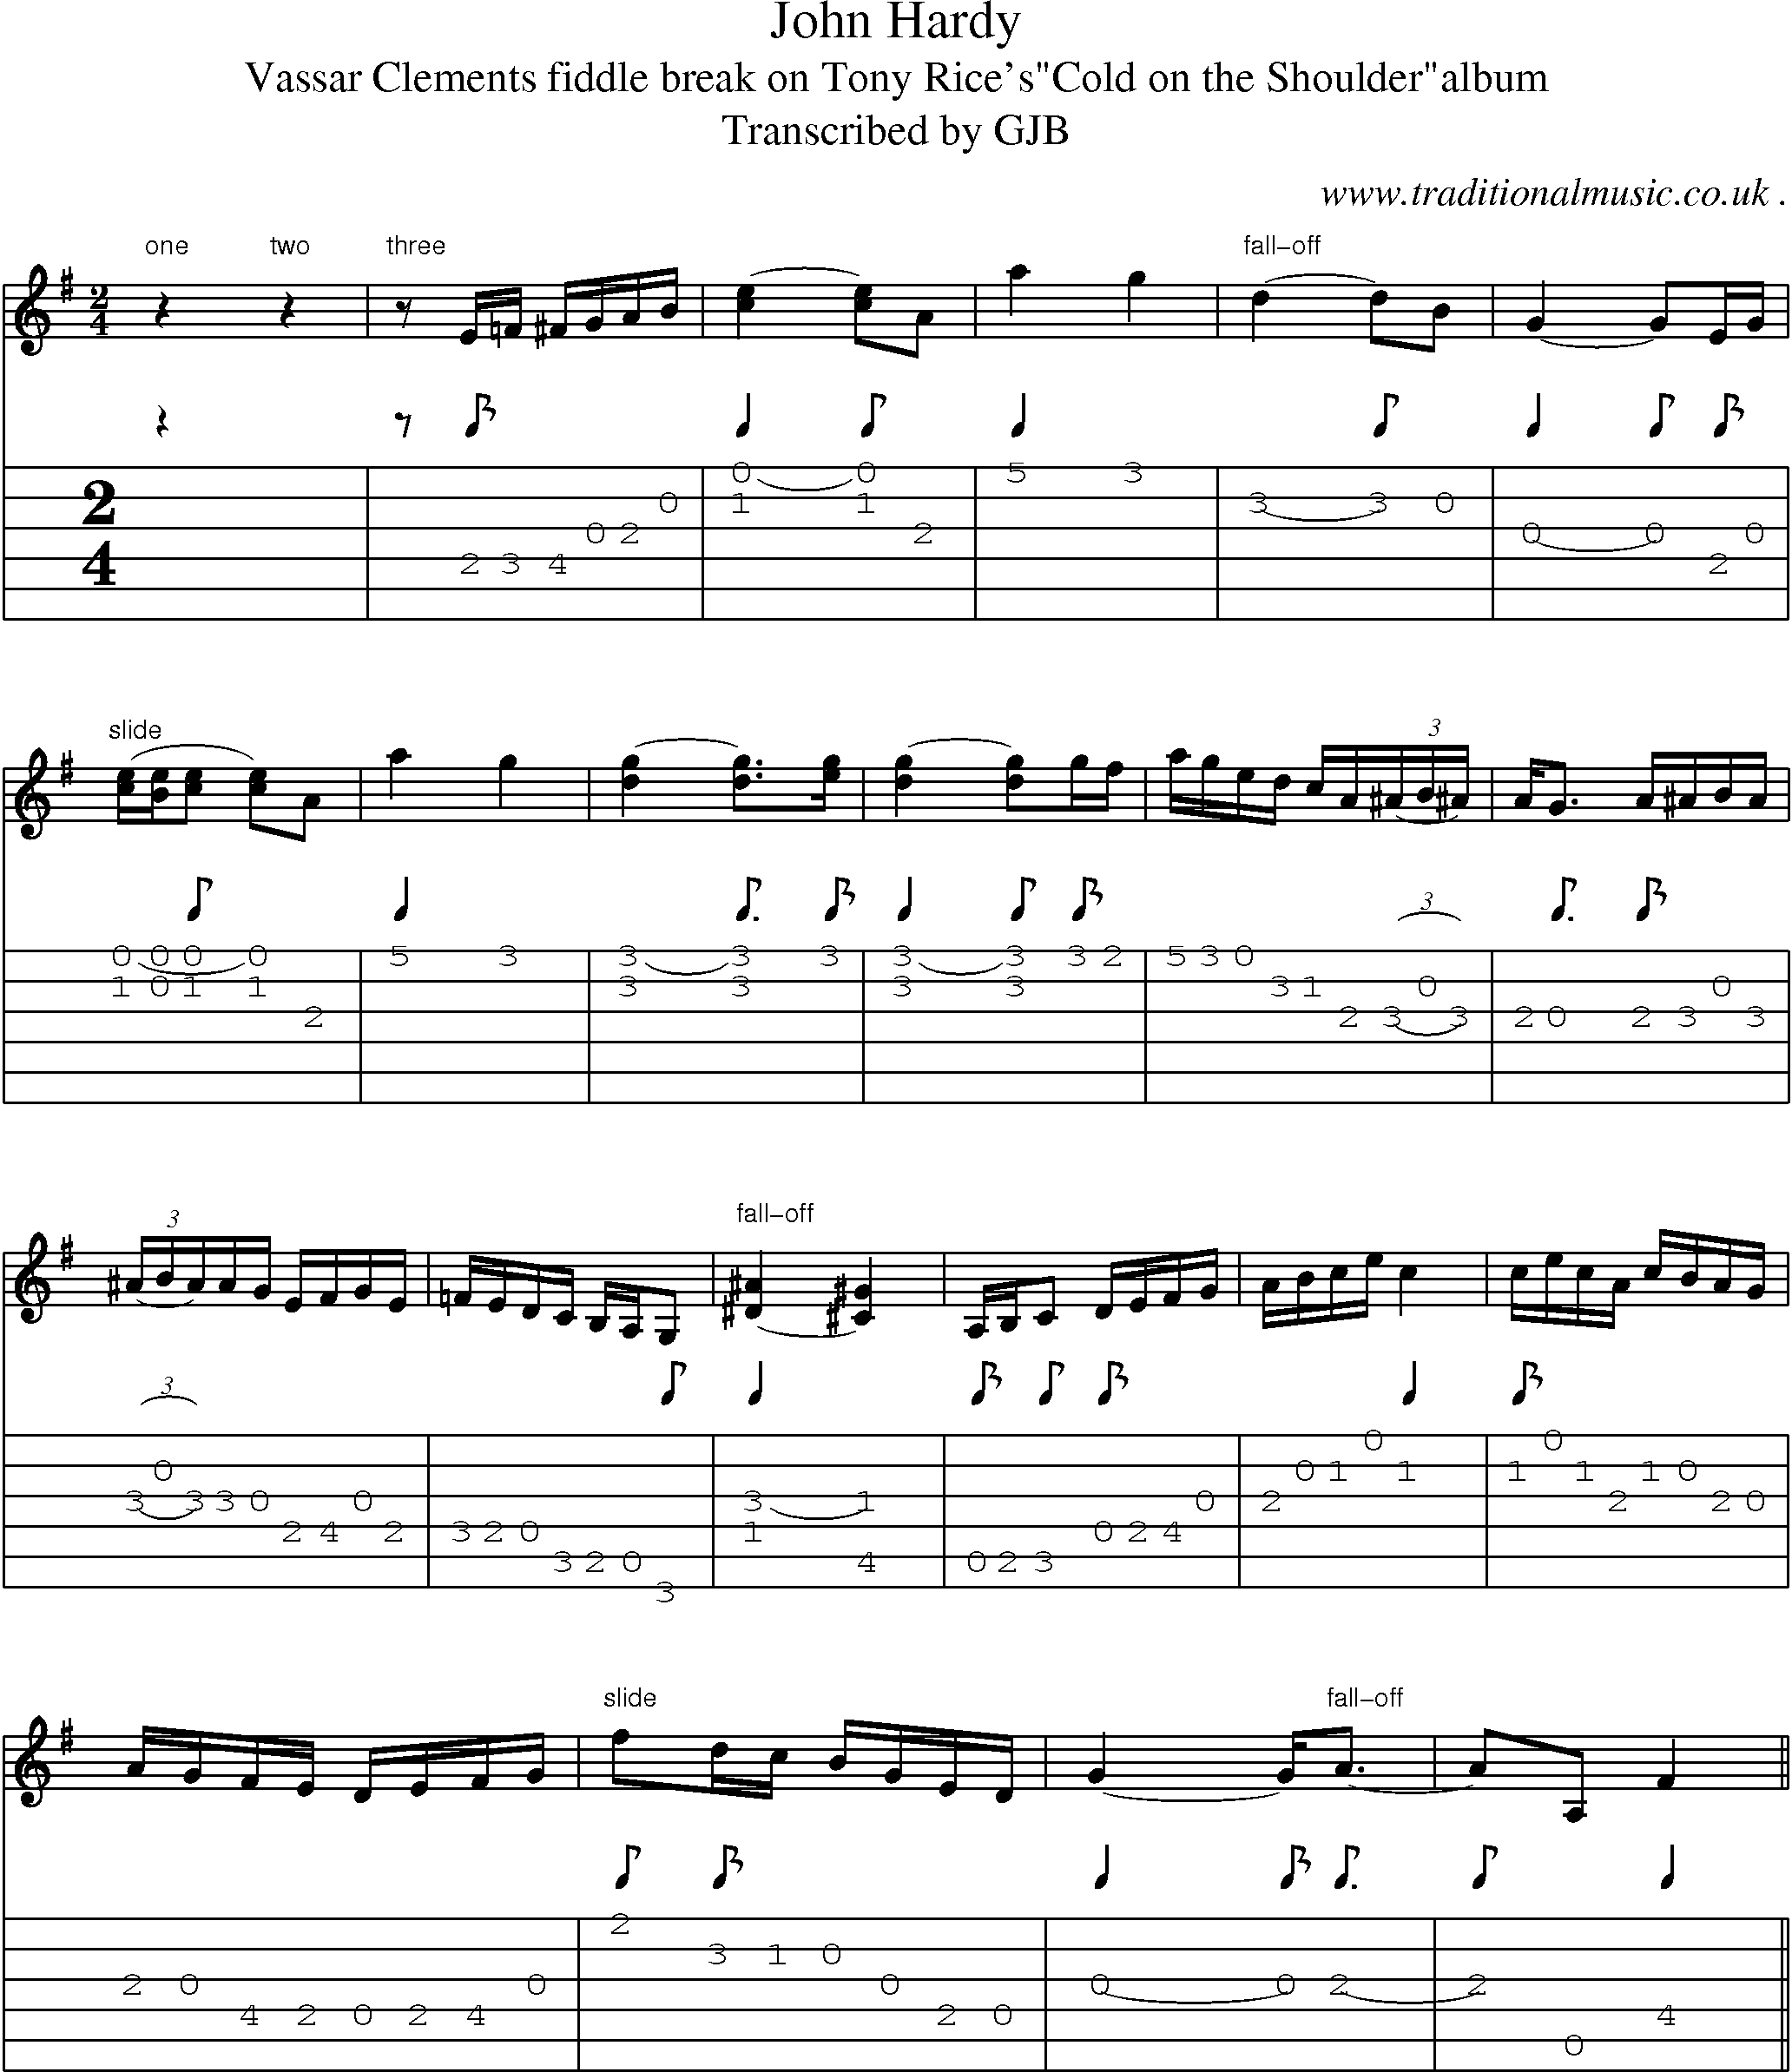 Sheet-Music and Guitar Tabs for John Hardy